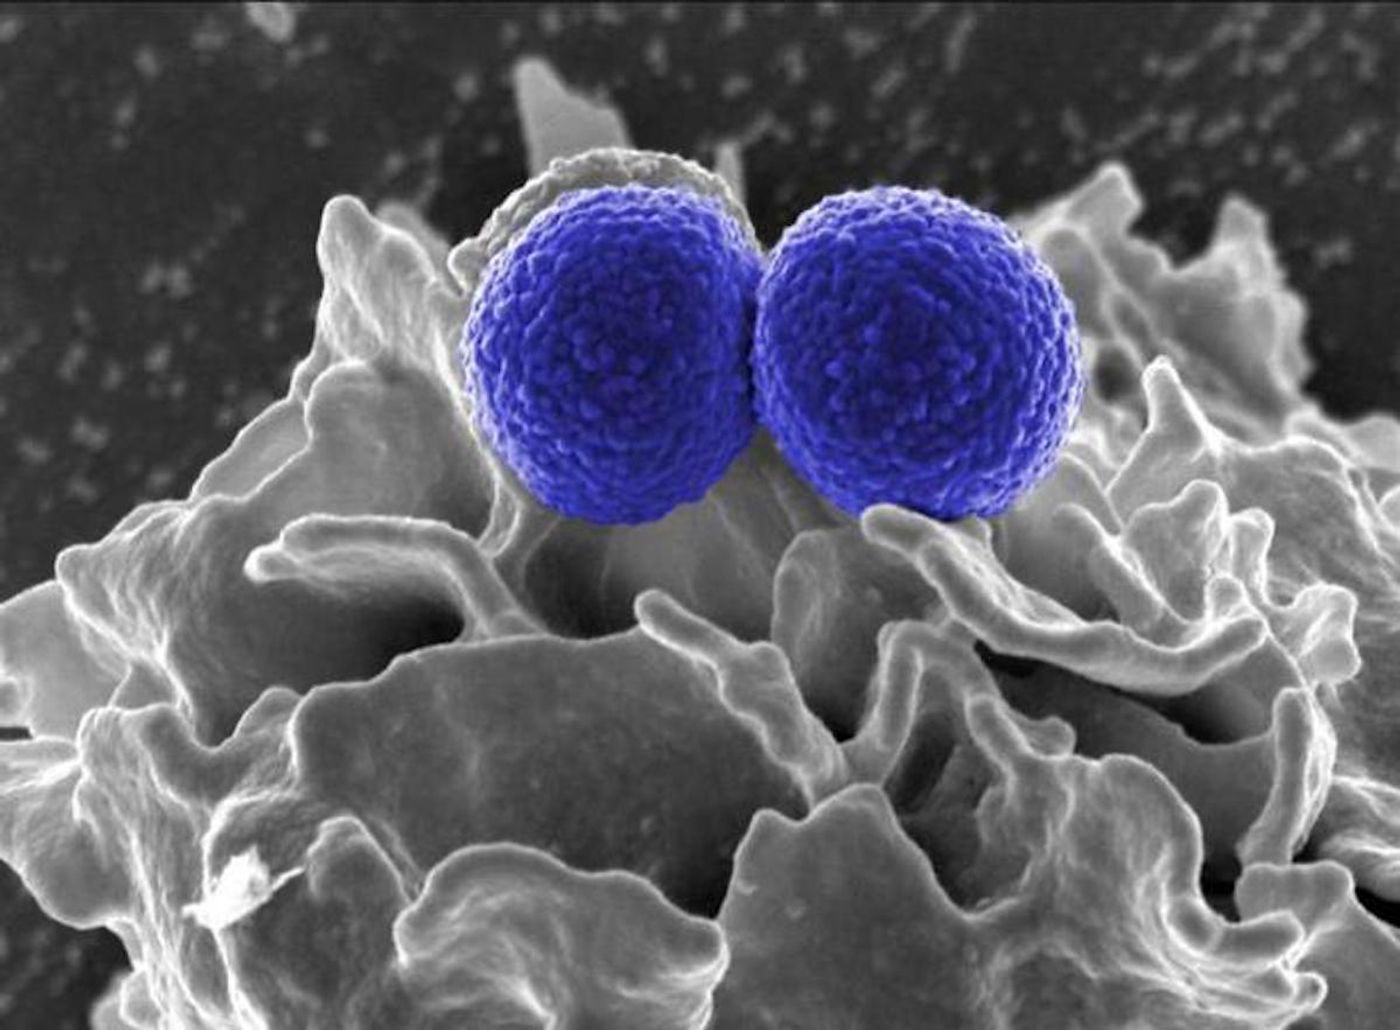 Two blue-colored, spherical, methicillin-resistant, Staphylococcus aureus (MRSA) bacteria in the process of being phagocytized by an uncolored, human white blood cell (WBC). / Credit: National Institute of Allergy and Infectious Diseases (NIAID)